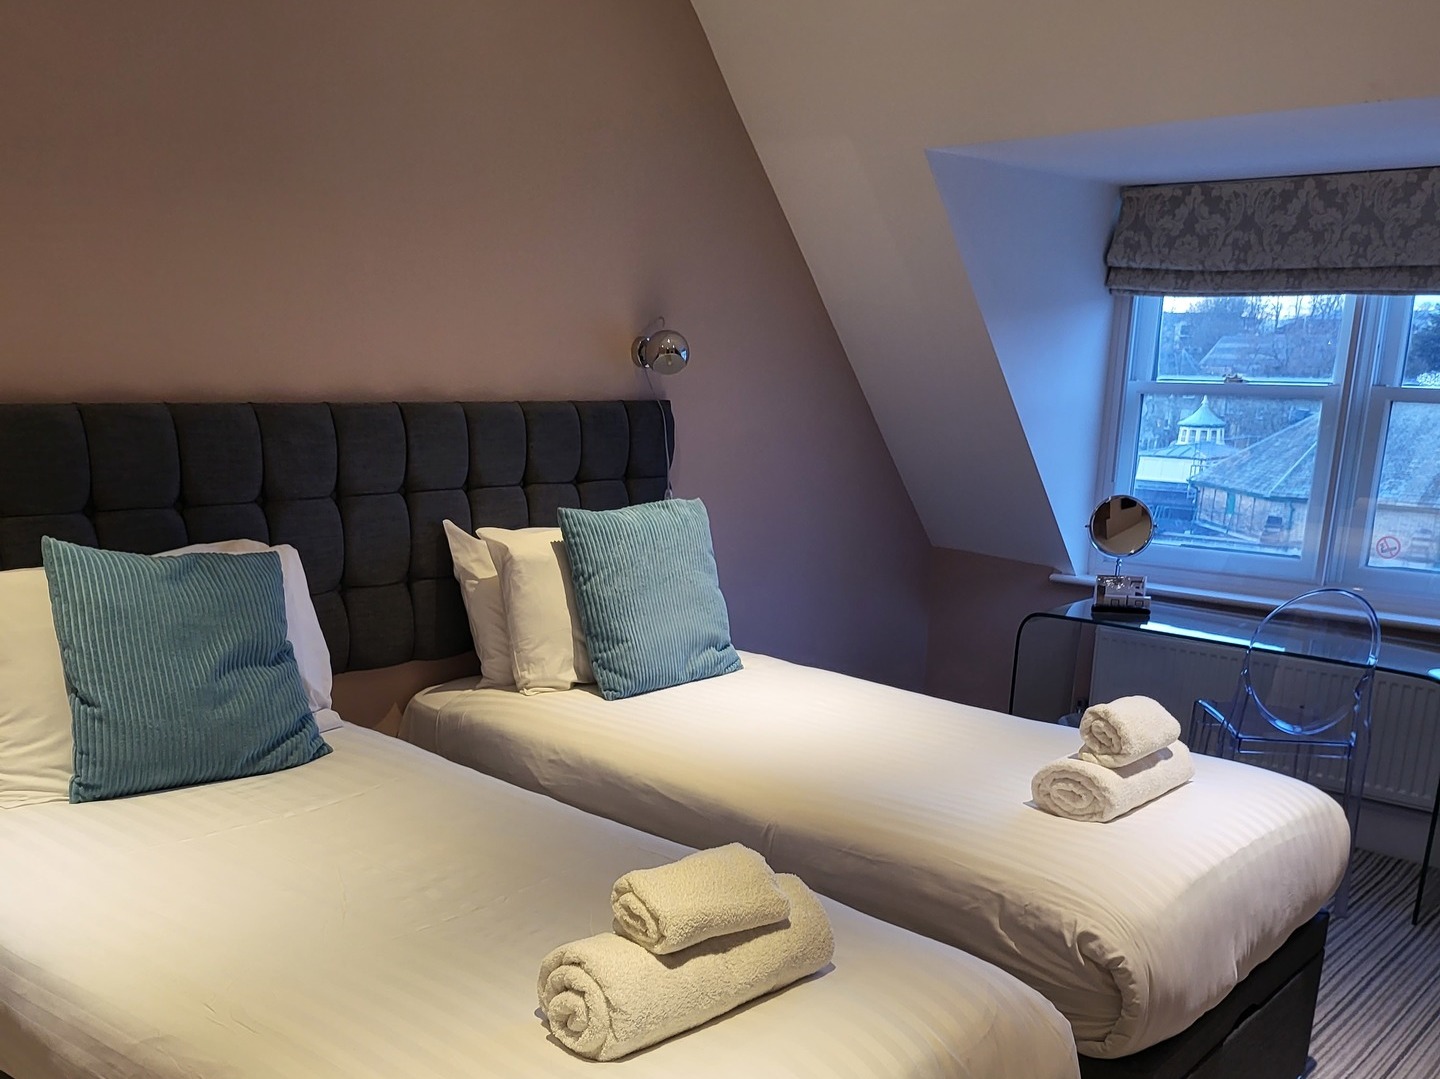 Executive one bedroom apartments to rent in Harrogate town centre north yorkshire hotel alternative